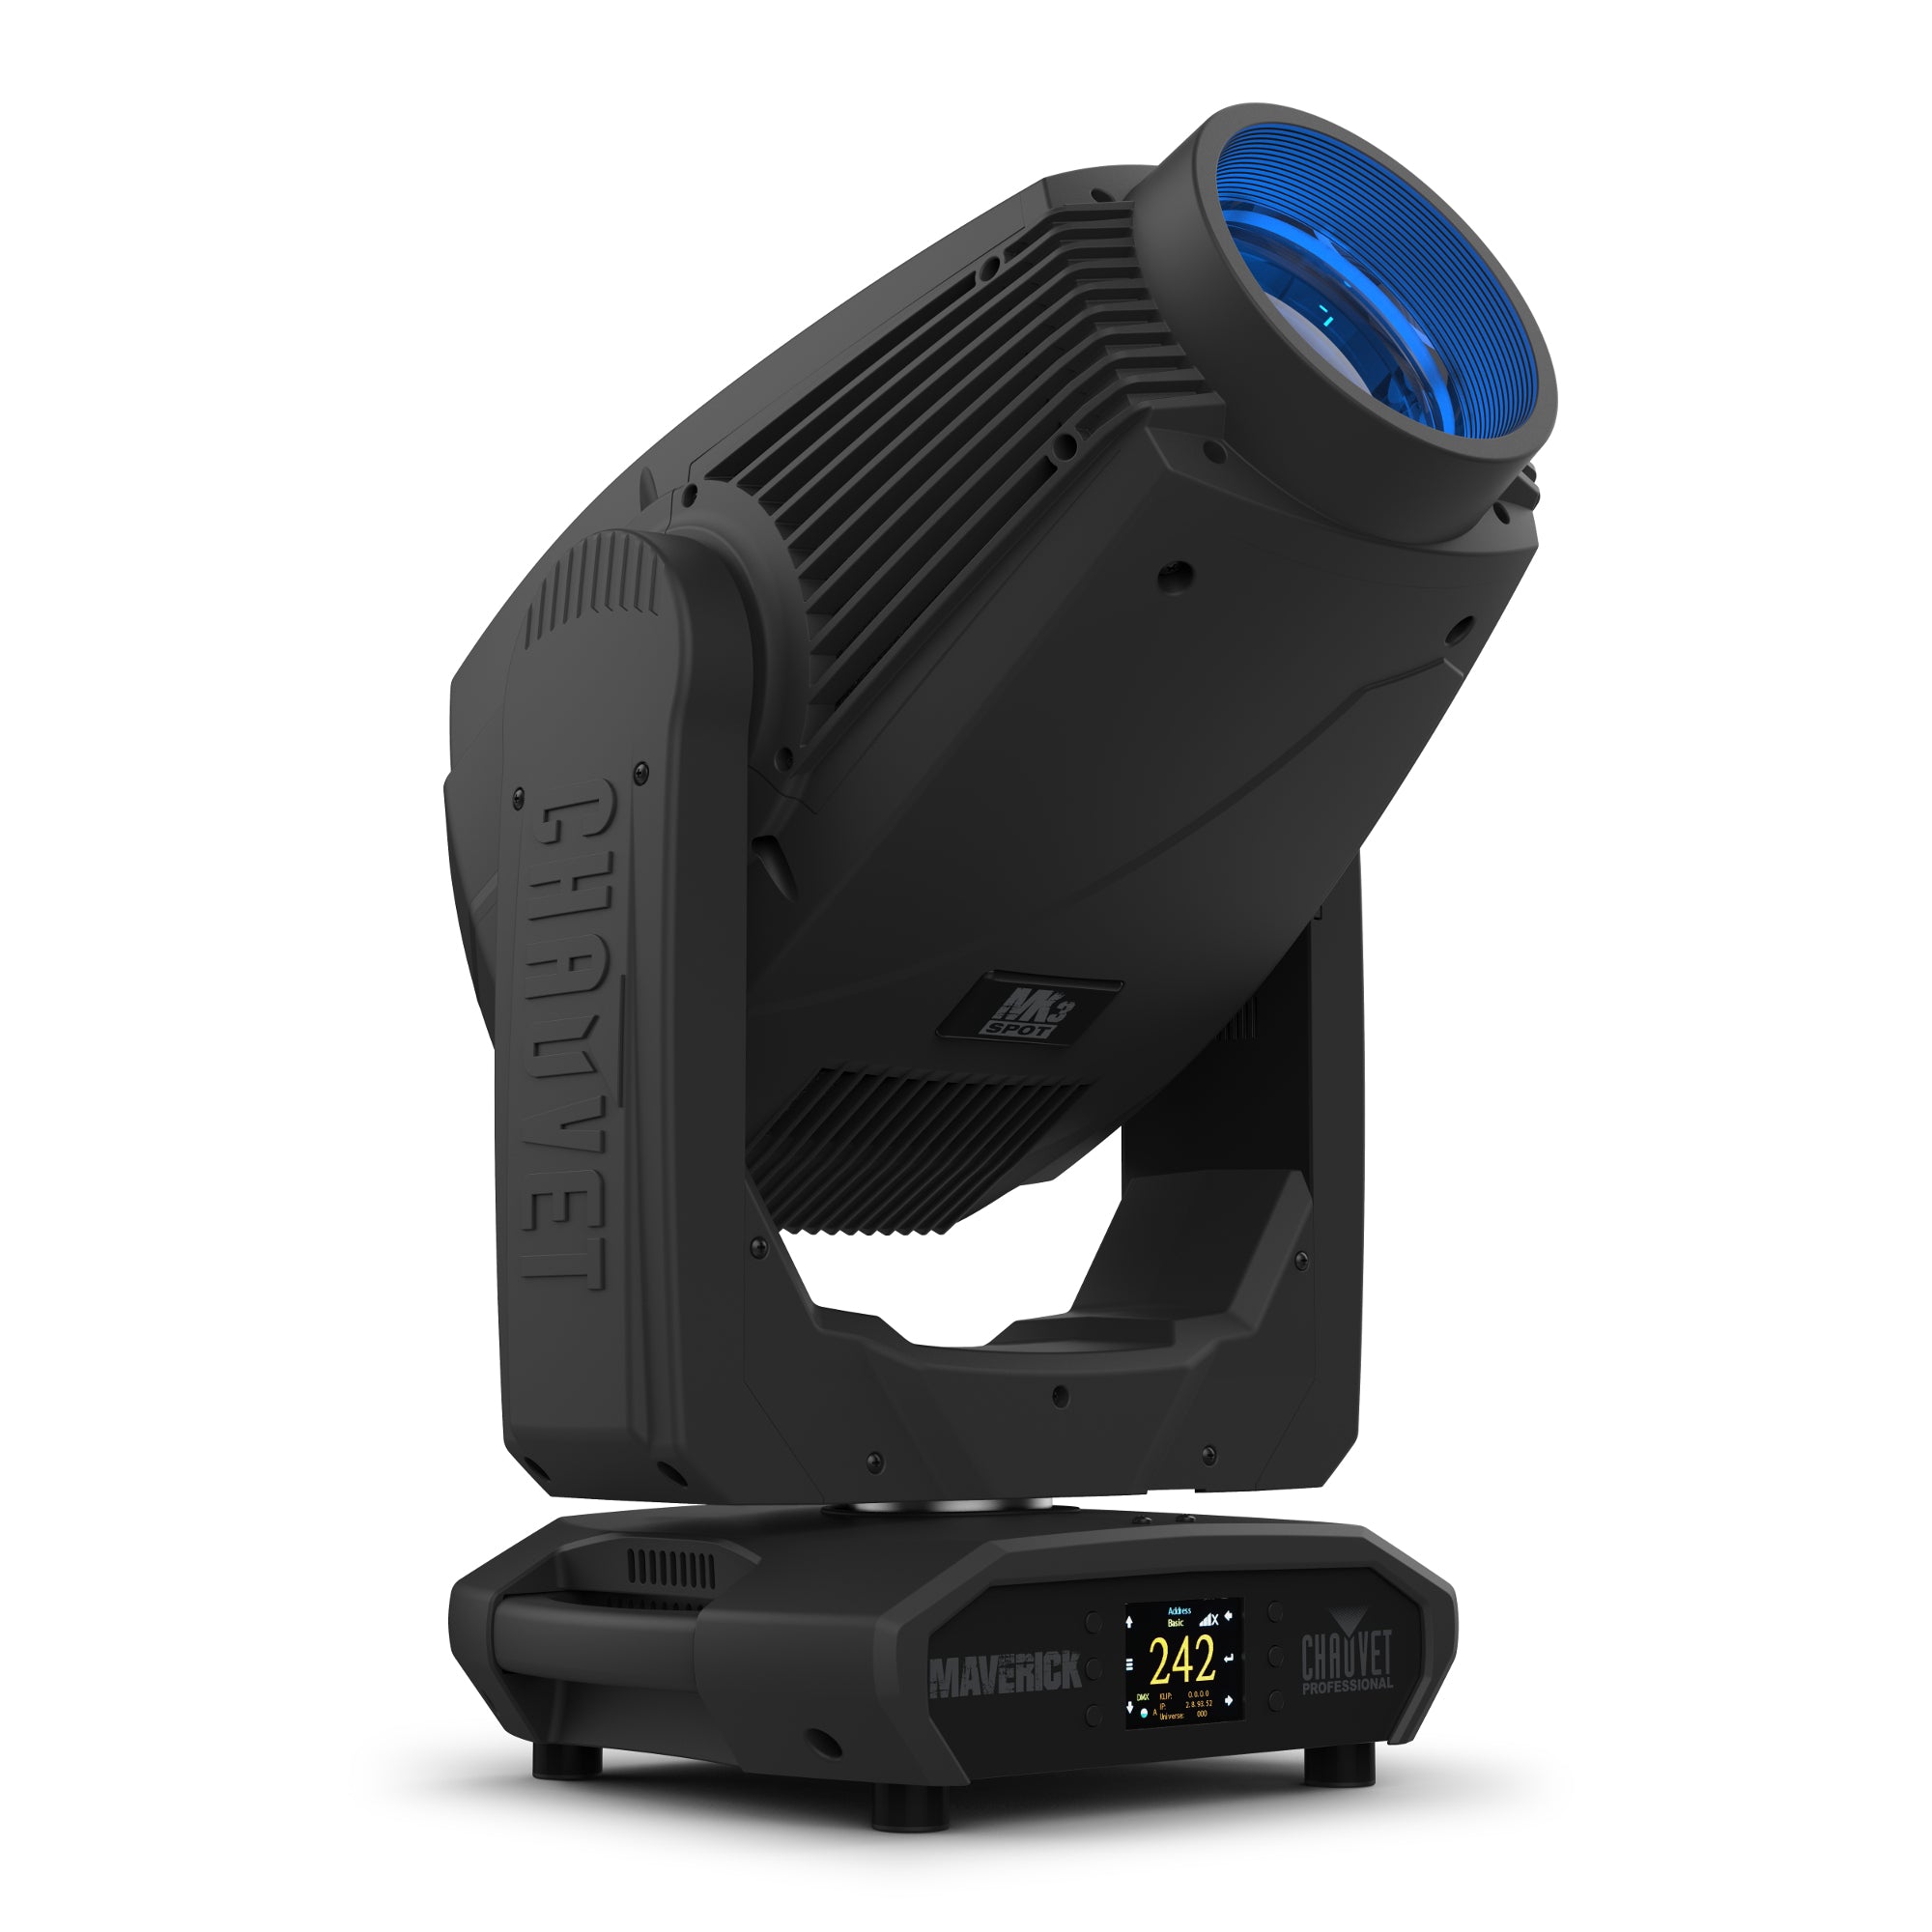 Chauvet Pro Maverick MK3 Spot 820W LED Moving Head With Zoom And CMY Color Mixing